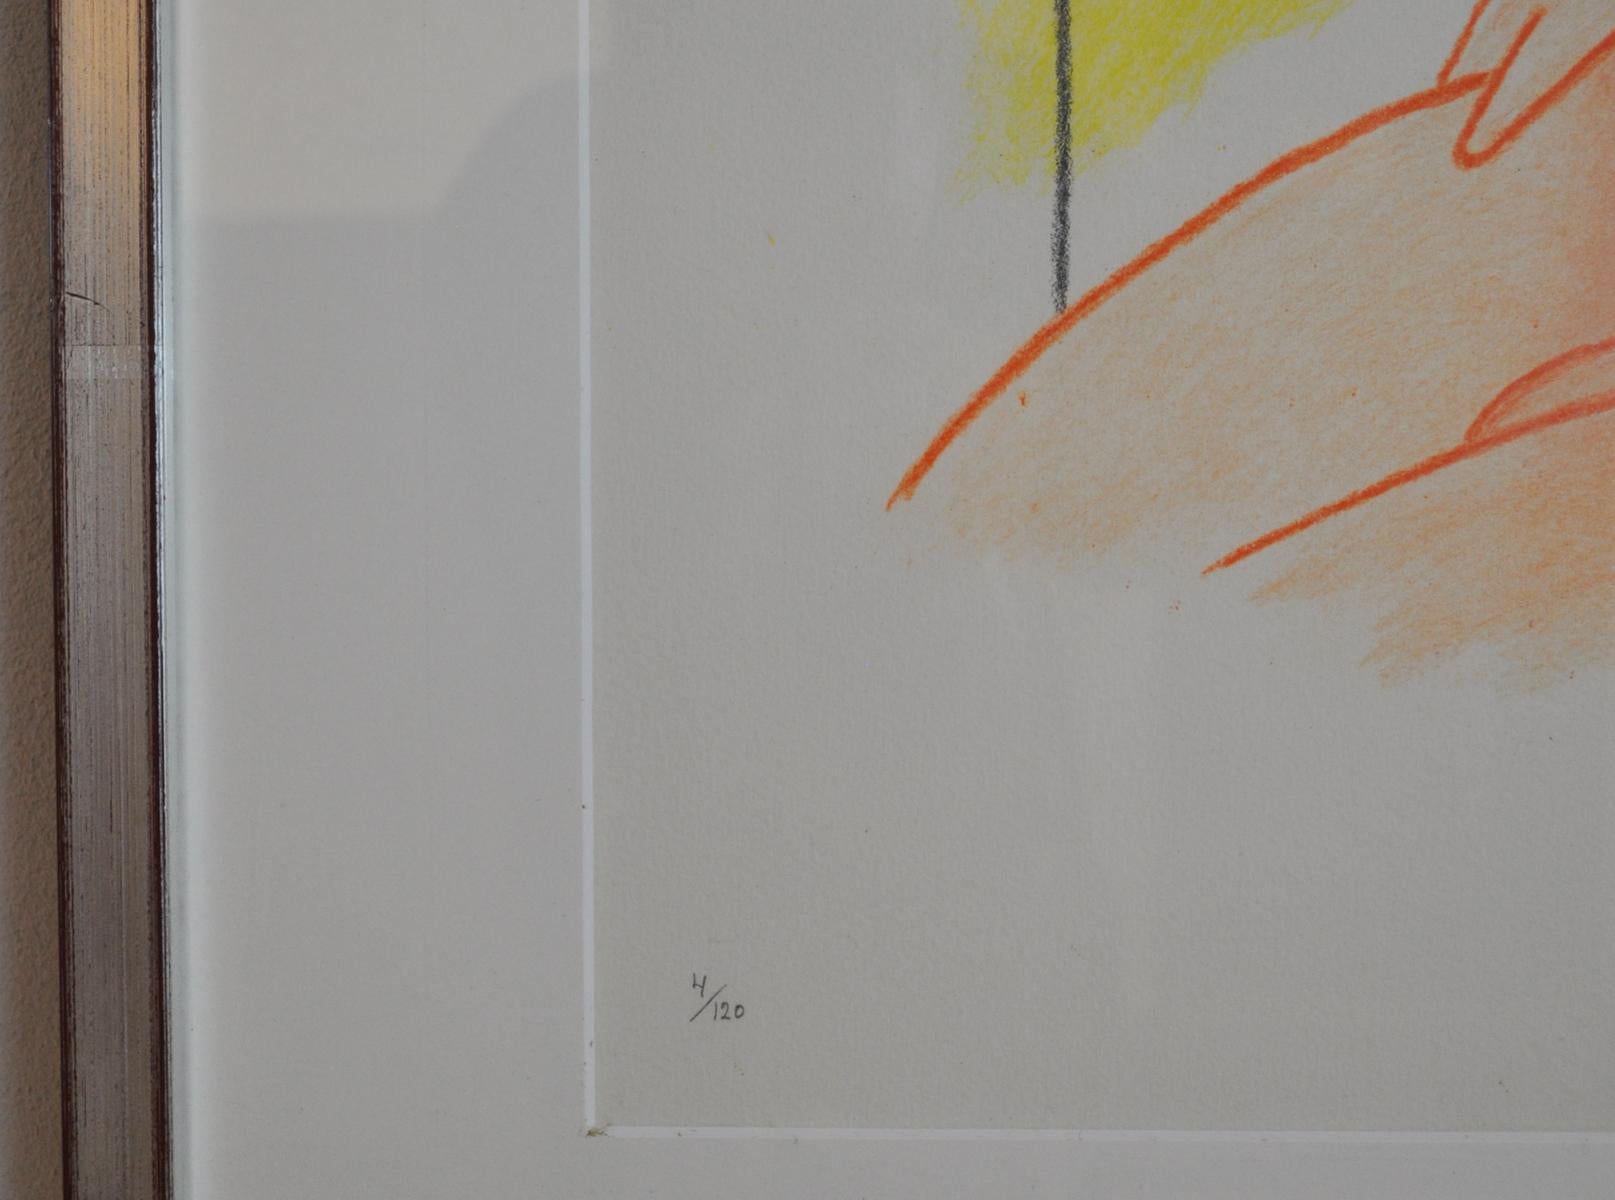 Wilhelm Freddie (1909-95), Lithograph, Composition, 1991
Signed and numbered 4/120. 
Frame size: 90 cm H x 69 cm W

Wilhelm Freddie was a Danish painter, graphic artist, object artist and professor at the Royal Danish Academy of Fine Arts in